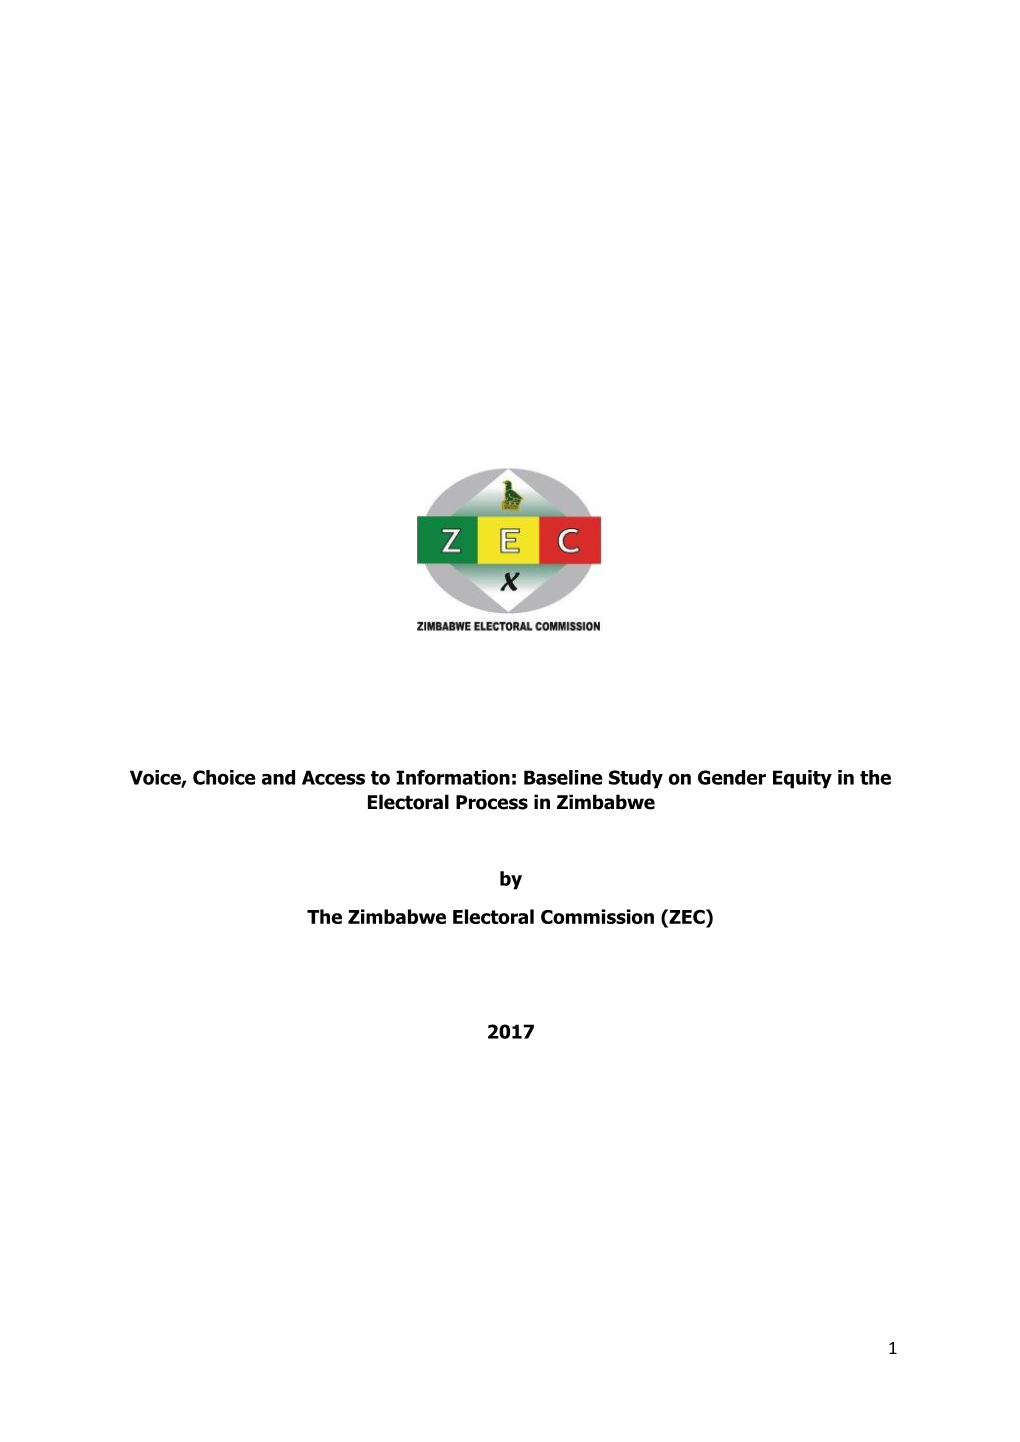 Gender Equality Baseline Survey That ZEC Conducted in 2017